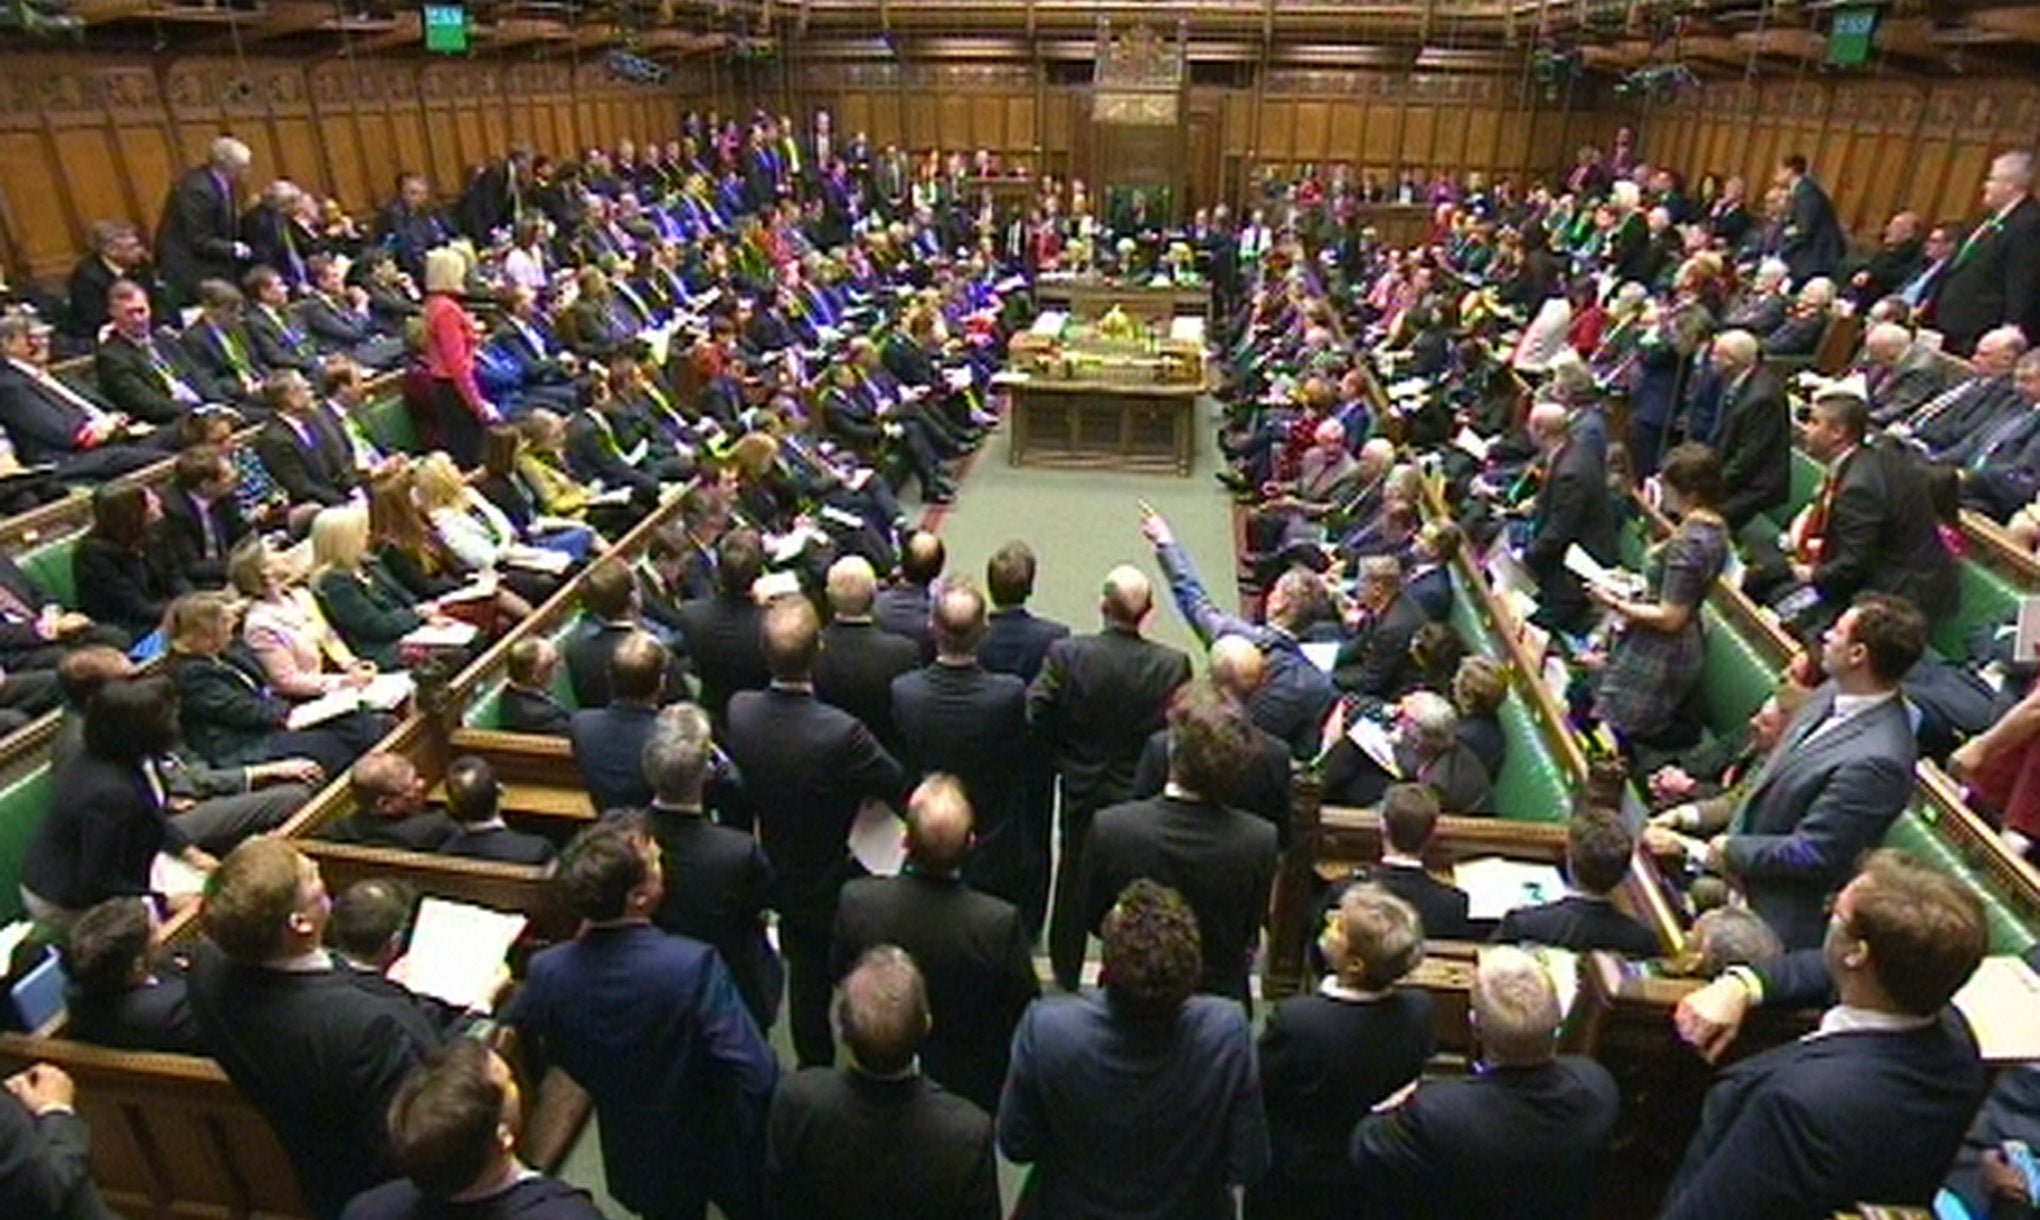 The debating chamber during Prime Minister's Questions in the House of Commons,